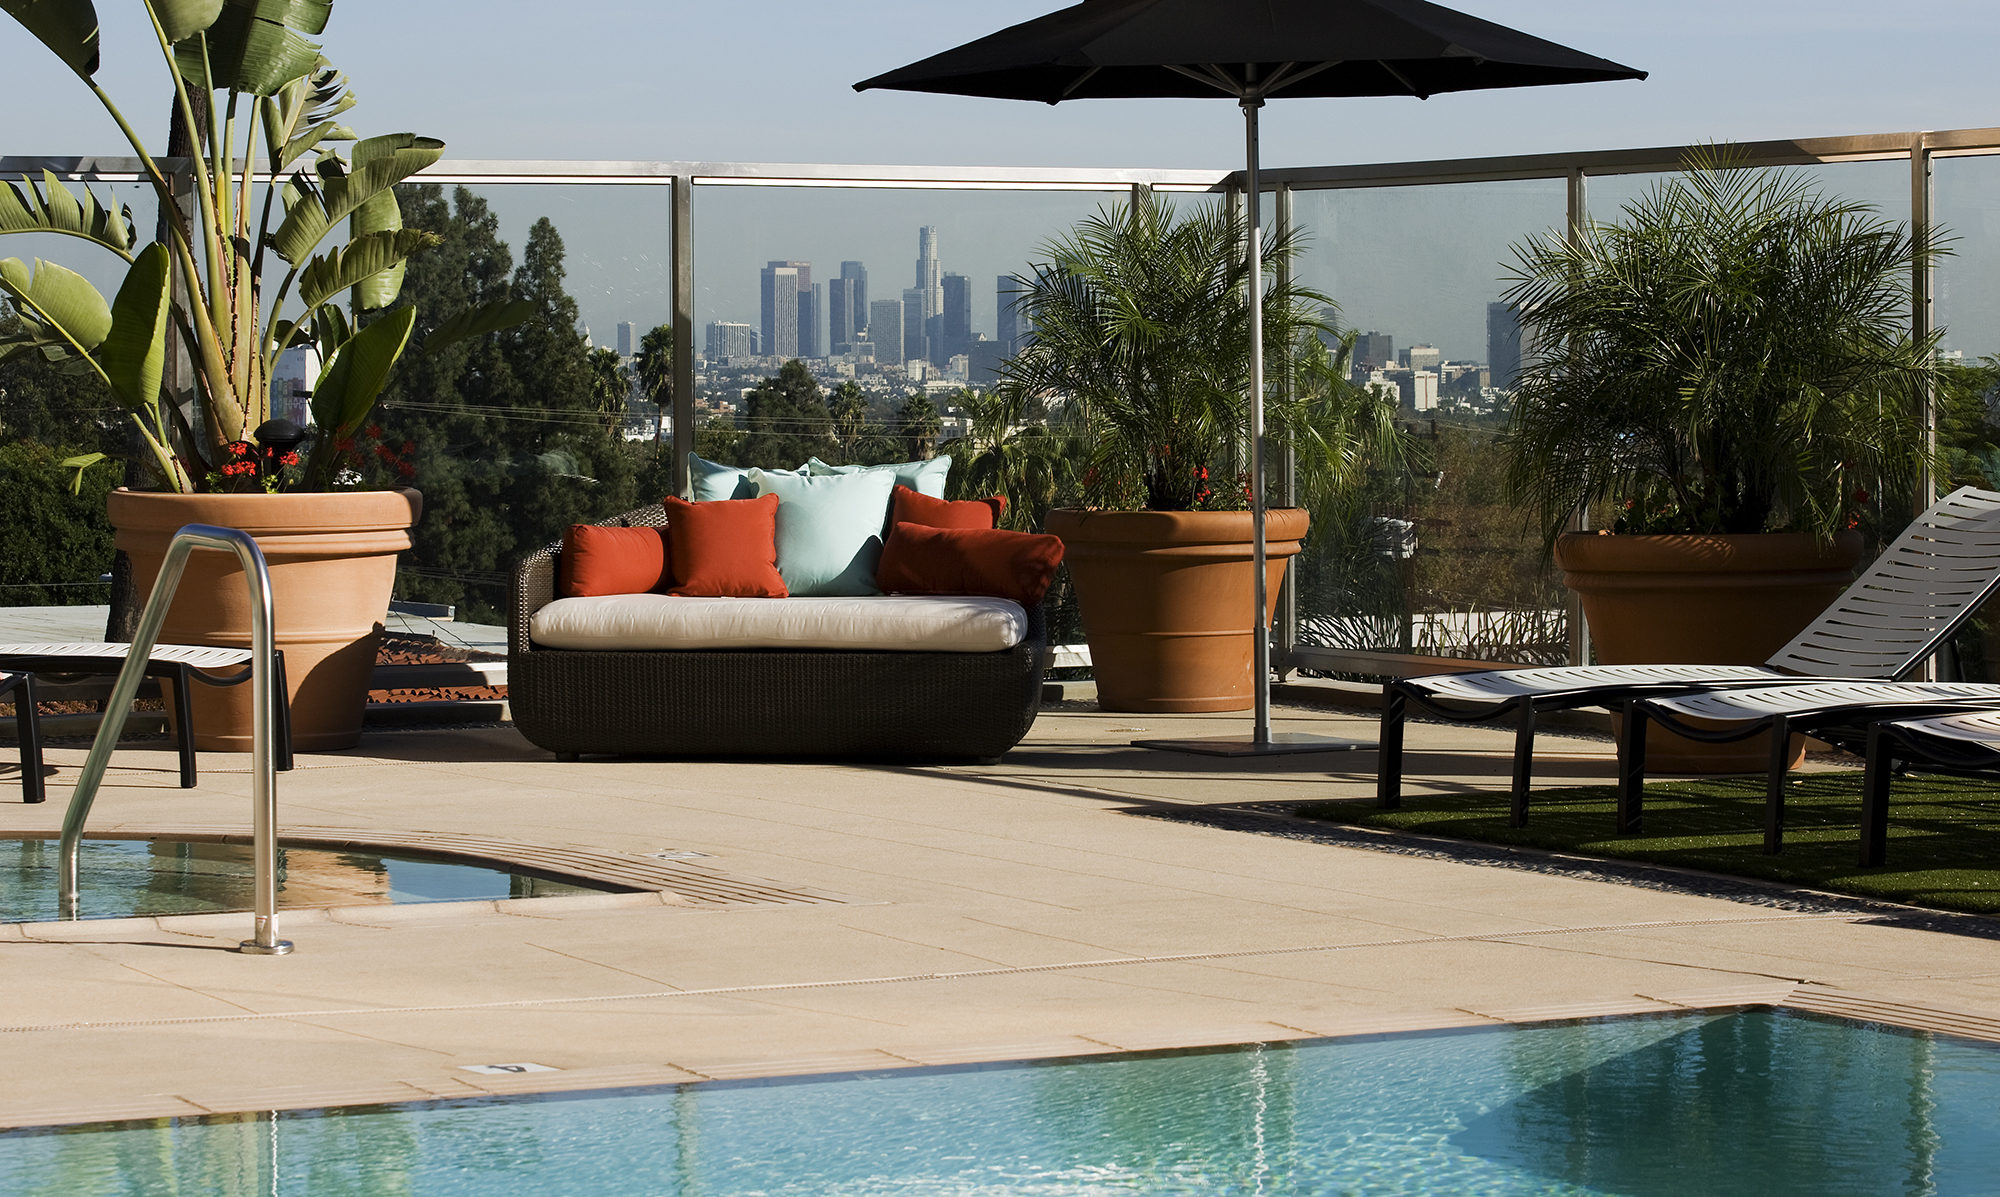 Pool area with umbrella, seating and hot tub looking over city.